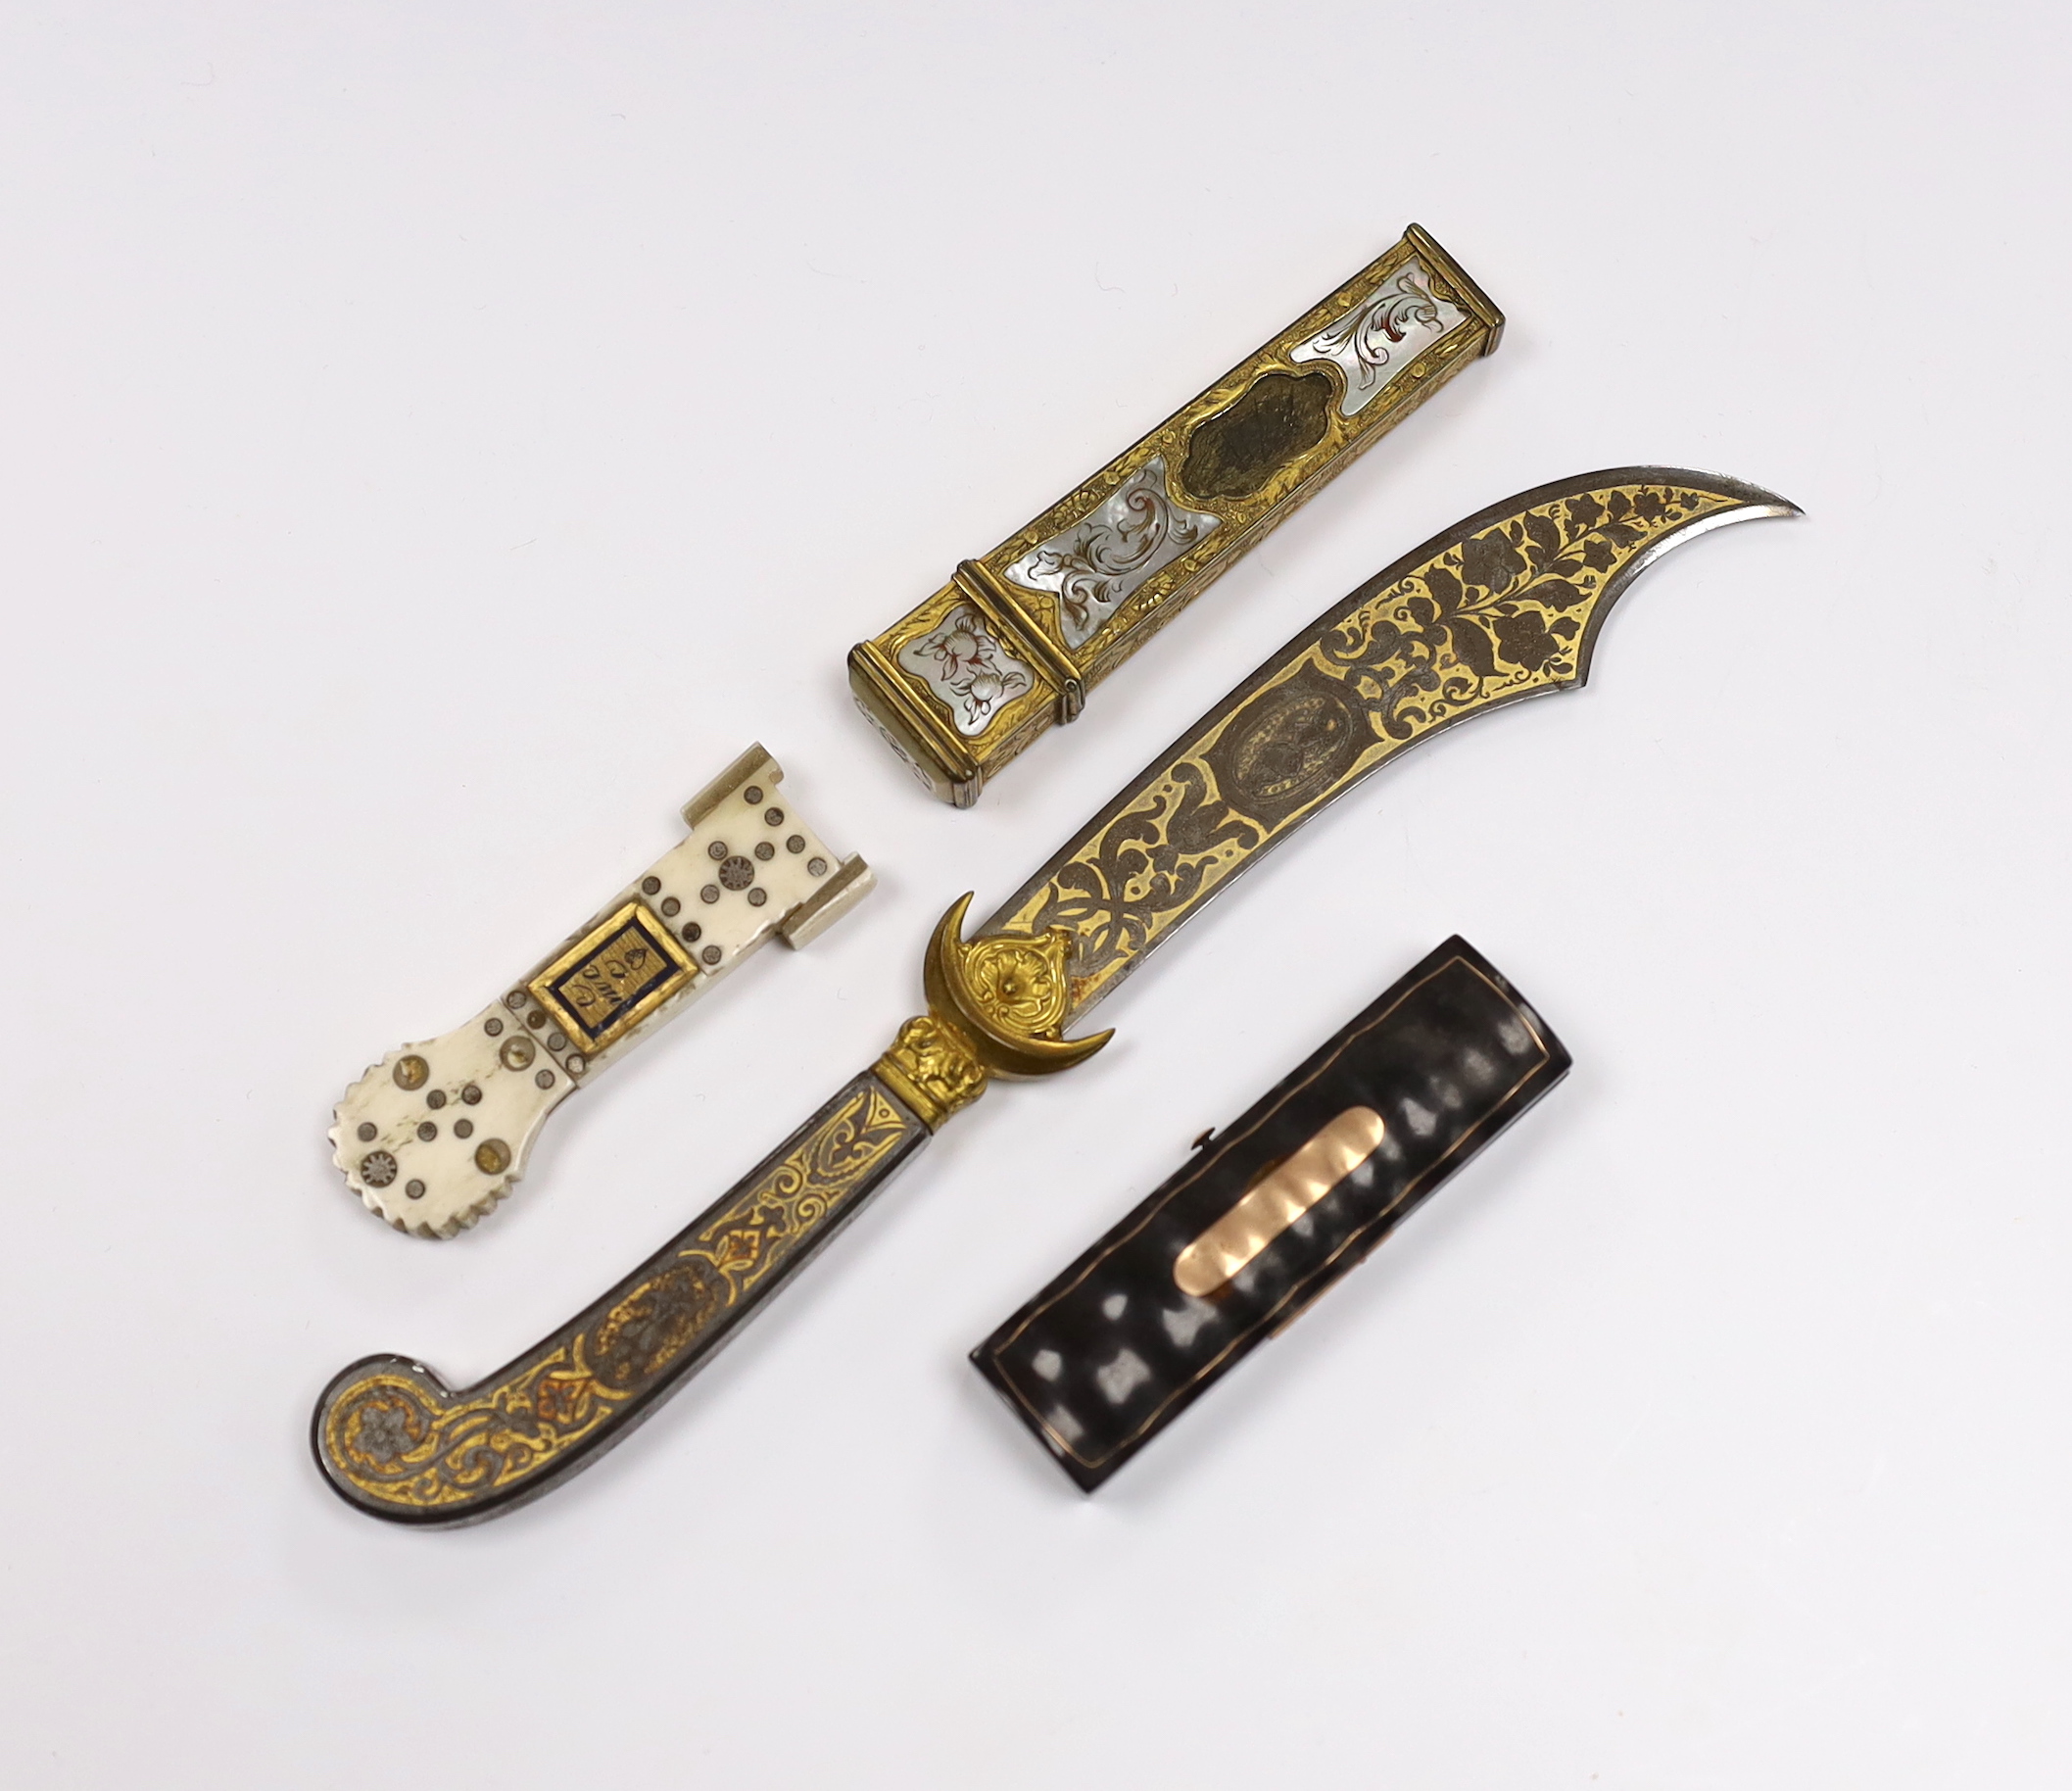 Two 19th century needle cases, one in bone, and one in gilt metal with mother-of-pearl inlay, a tortoiseshell toothpick case and a Toledo paperknife, paper knife 20cm